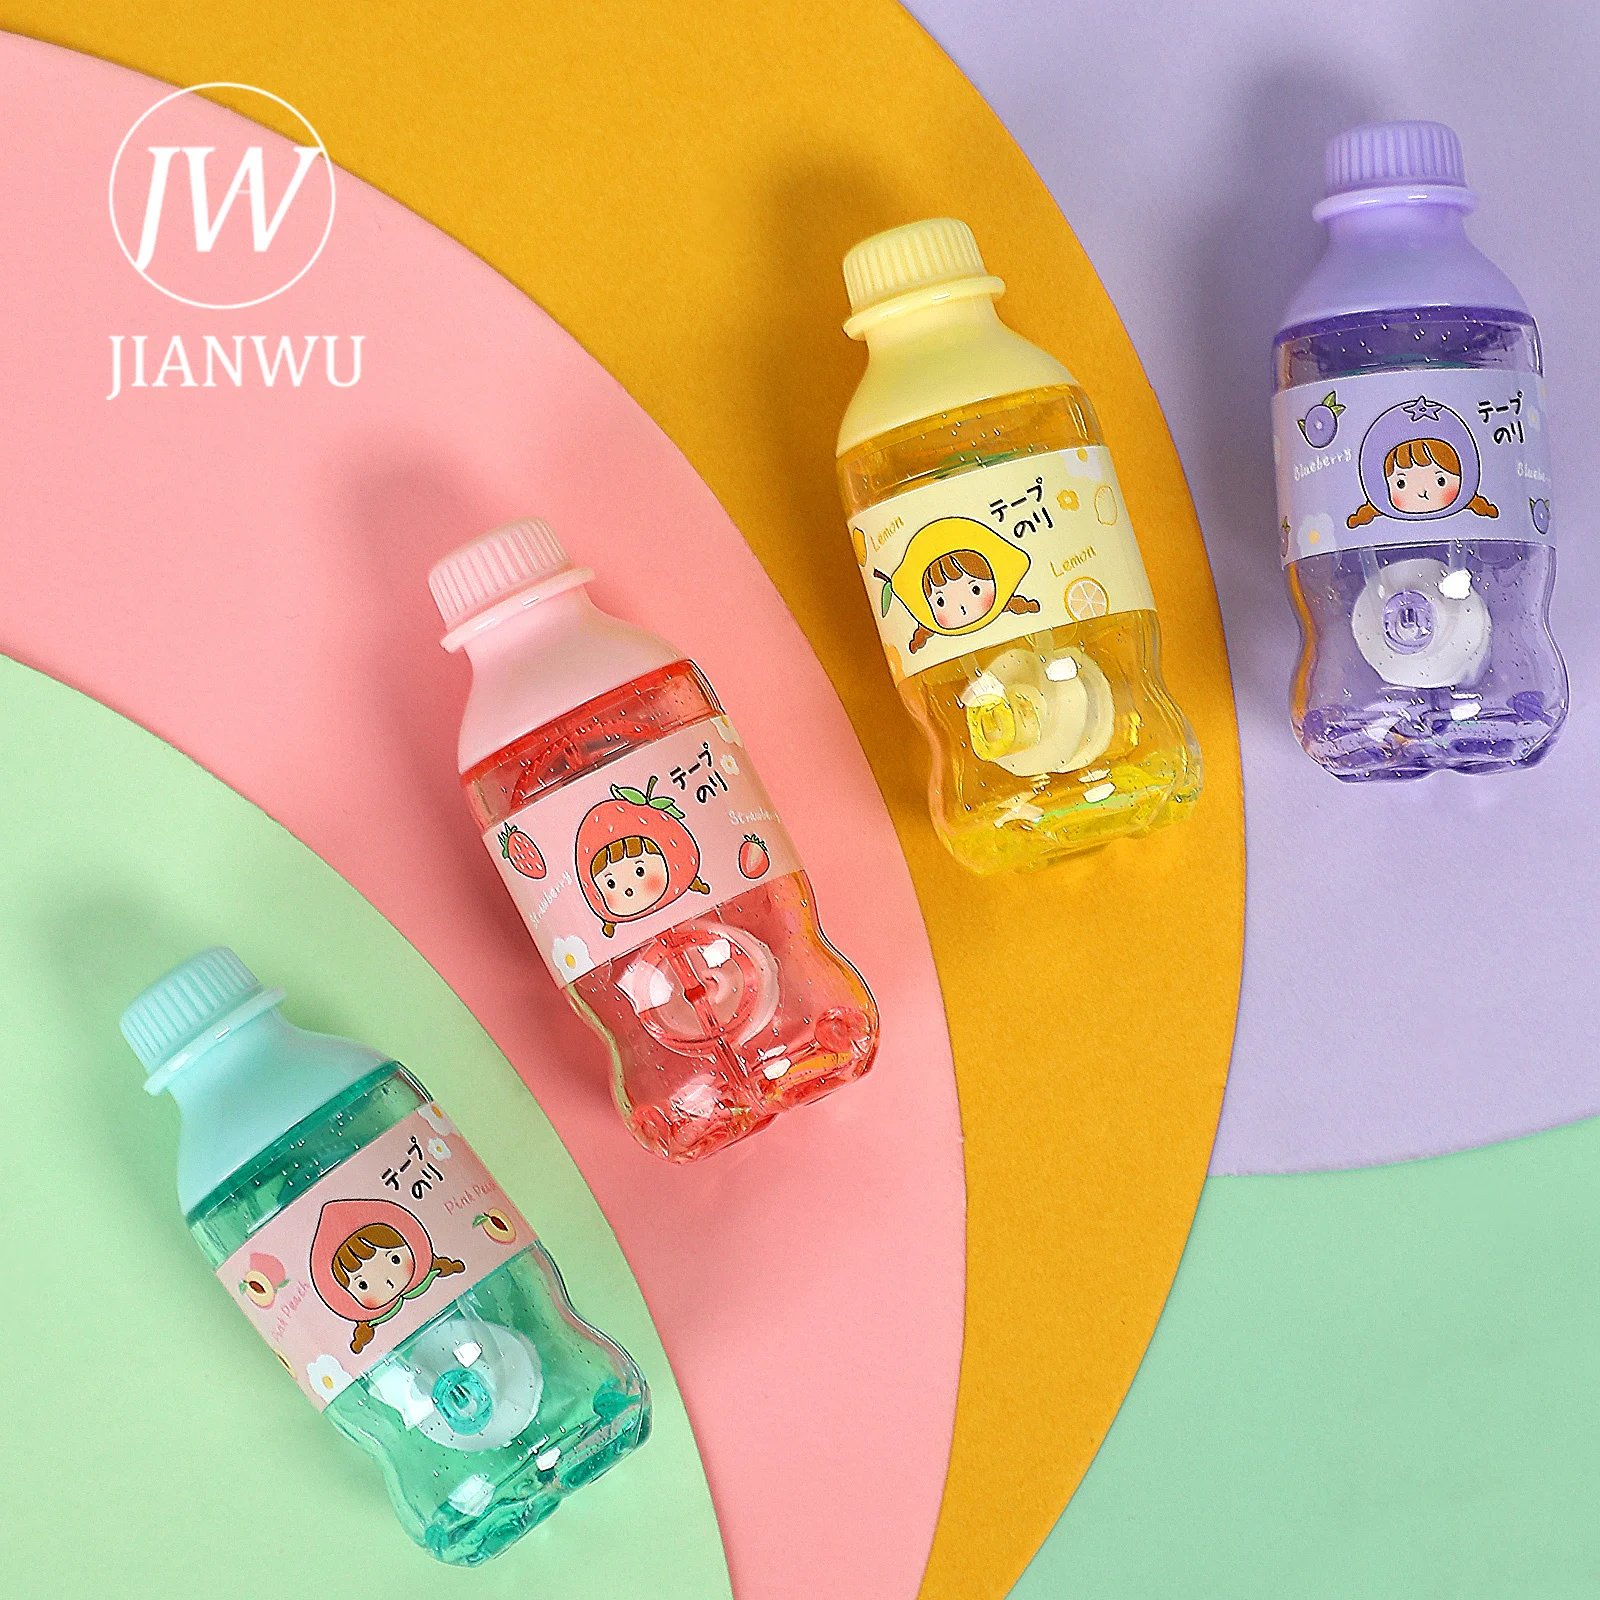 JIANWU 4 Pcs/Set Creative Cute Drink Bottle Shape Dot Glue 5m*5mm Strong Double-sided Roller Adhesive Tapes  Kawaii Stationery